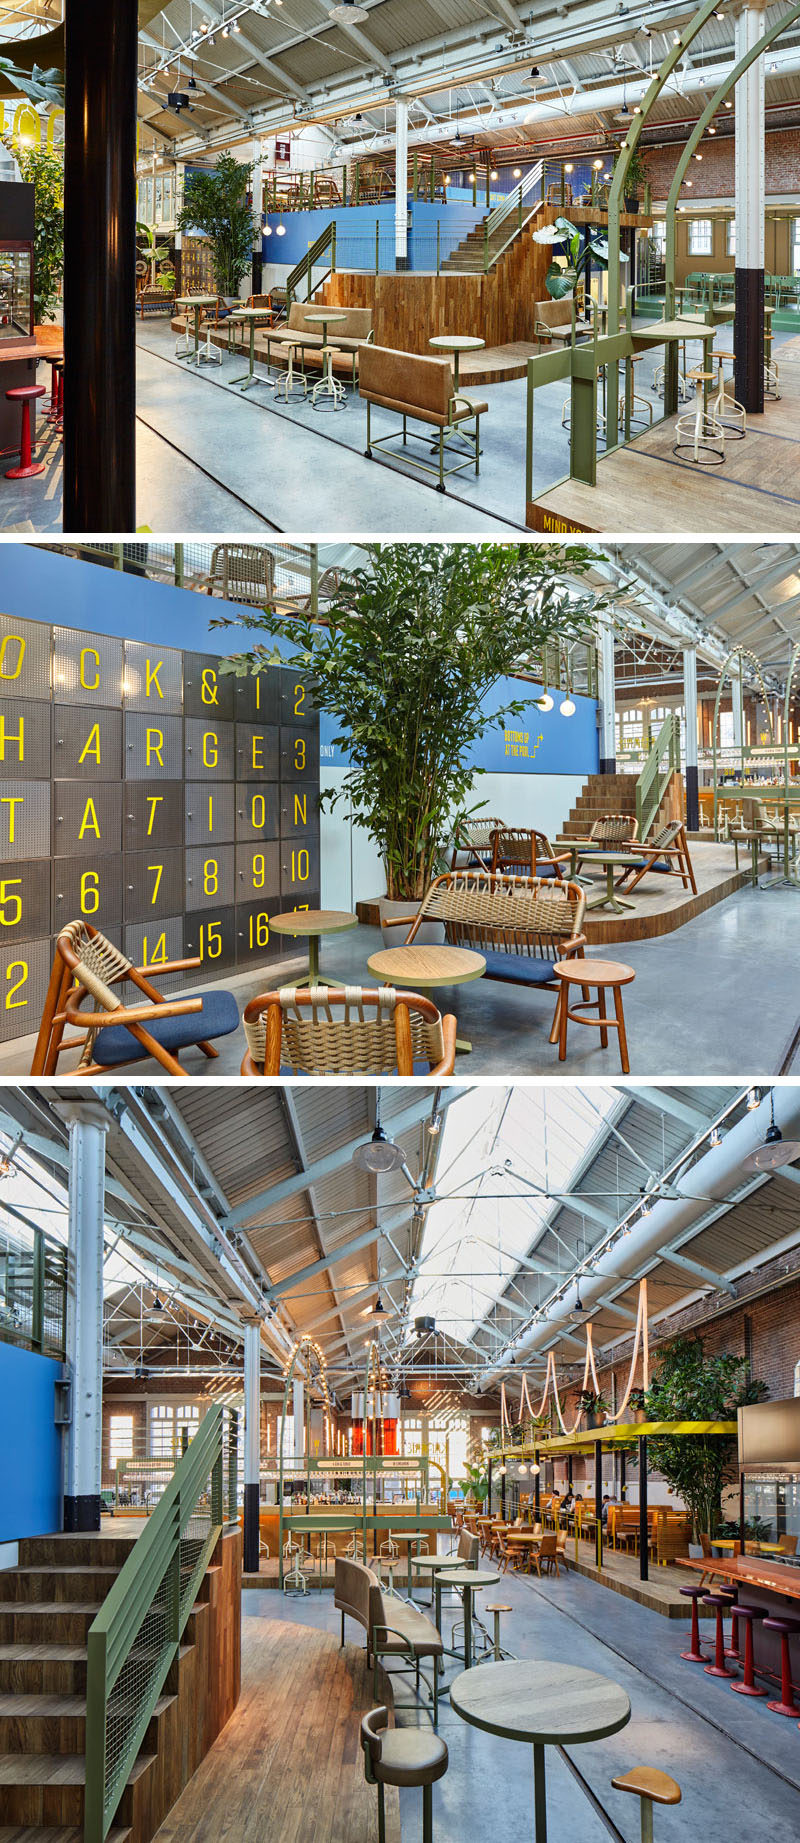 This restaurant and bar in Amsterdam can be found in a renovated tram depot.